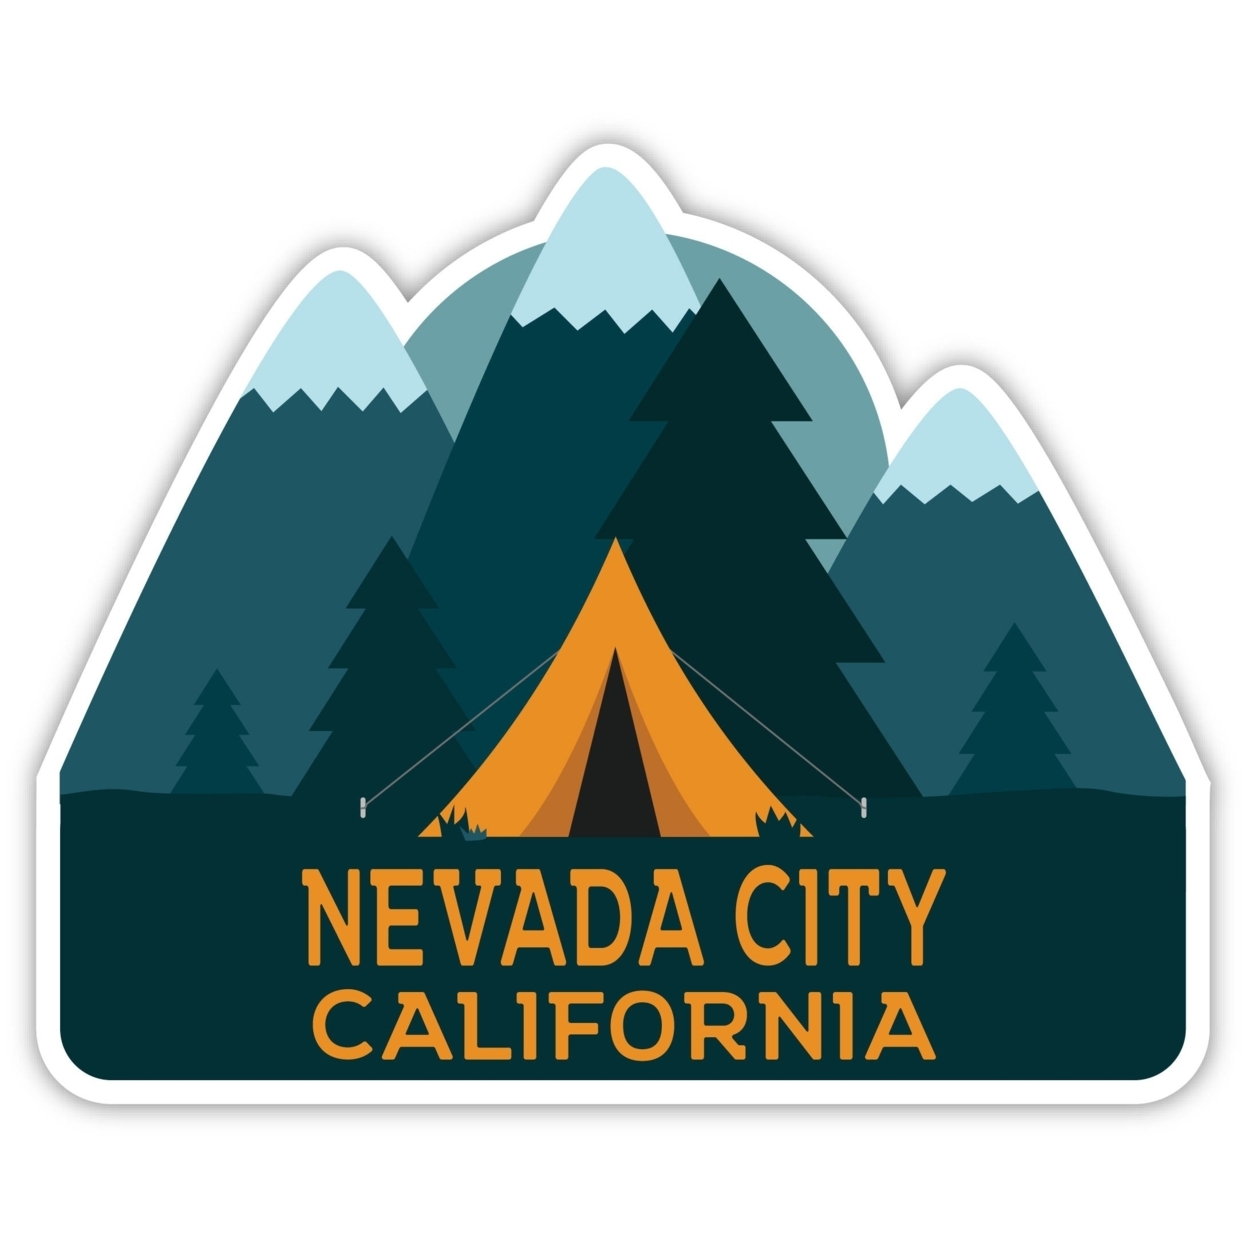 Nevada City California Souvenir Decorative Stickers (Choose Theme And Size) - Single Unit, 4-Inch, Great Outdoors